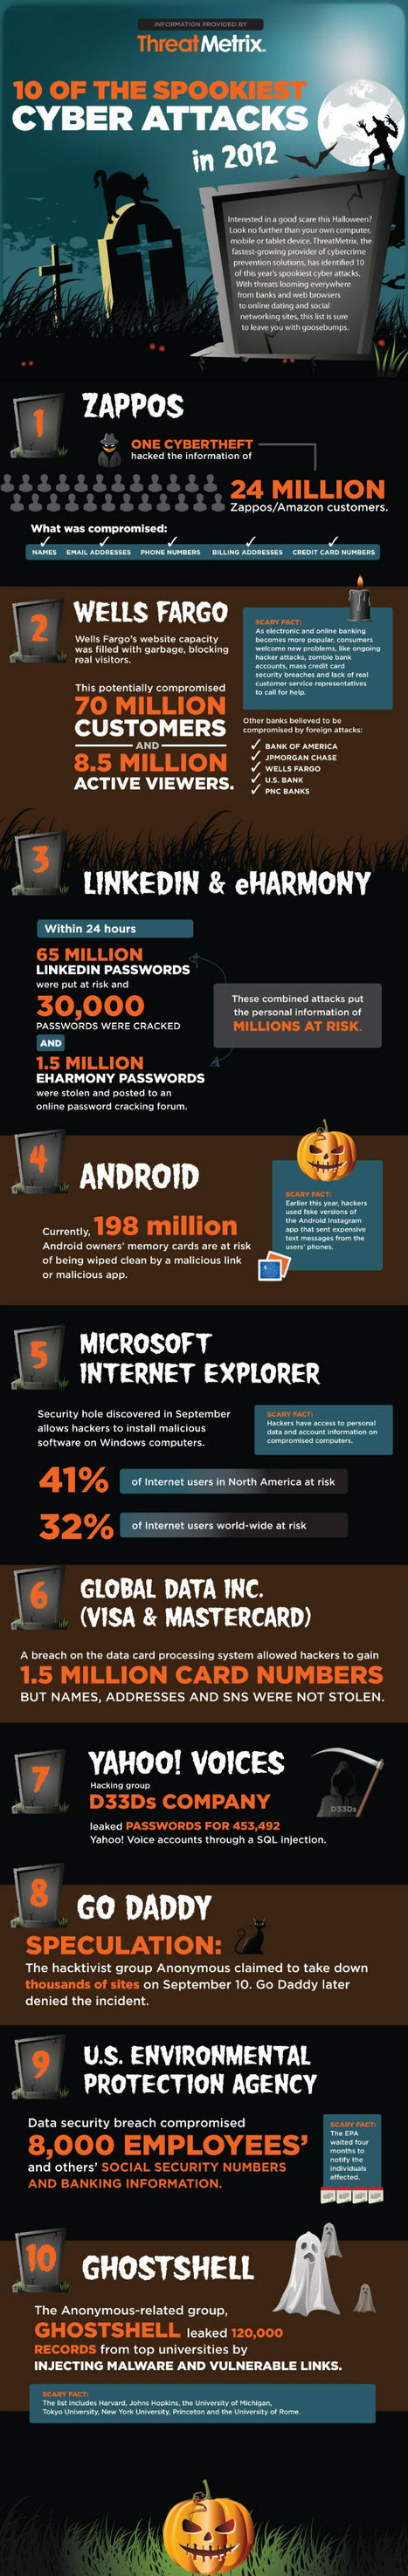 10 Spooky Cyberattacks in 2012 [INFOGRAPHIC] | Business Improvement and Social media | Scoop.it